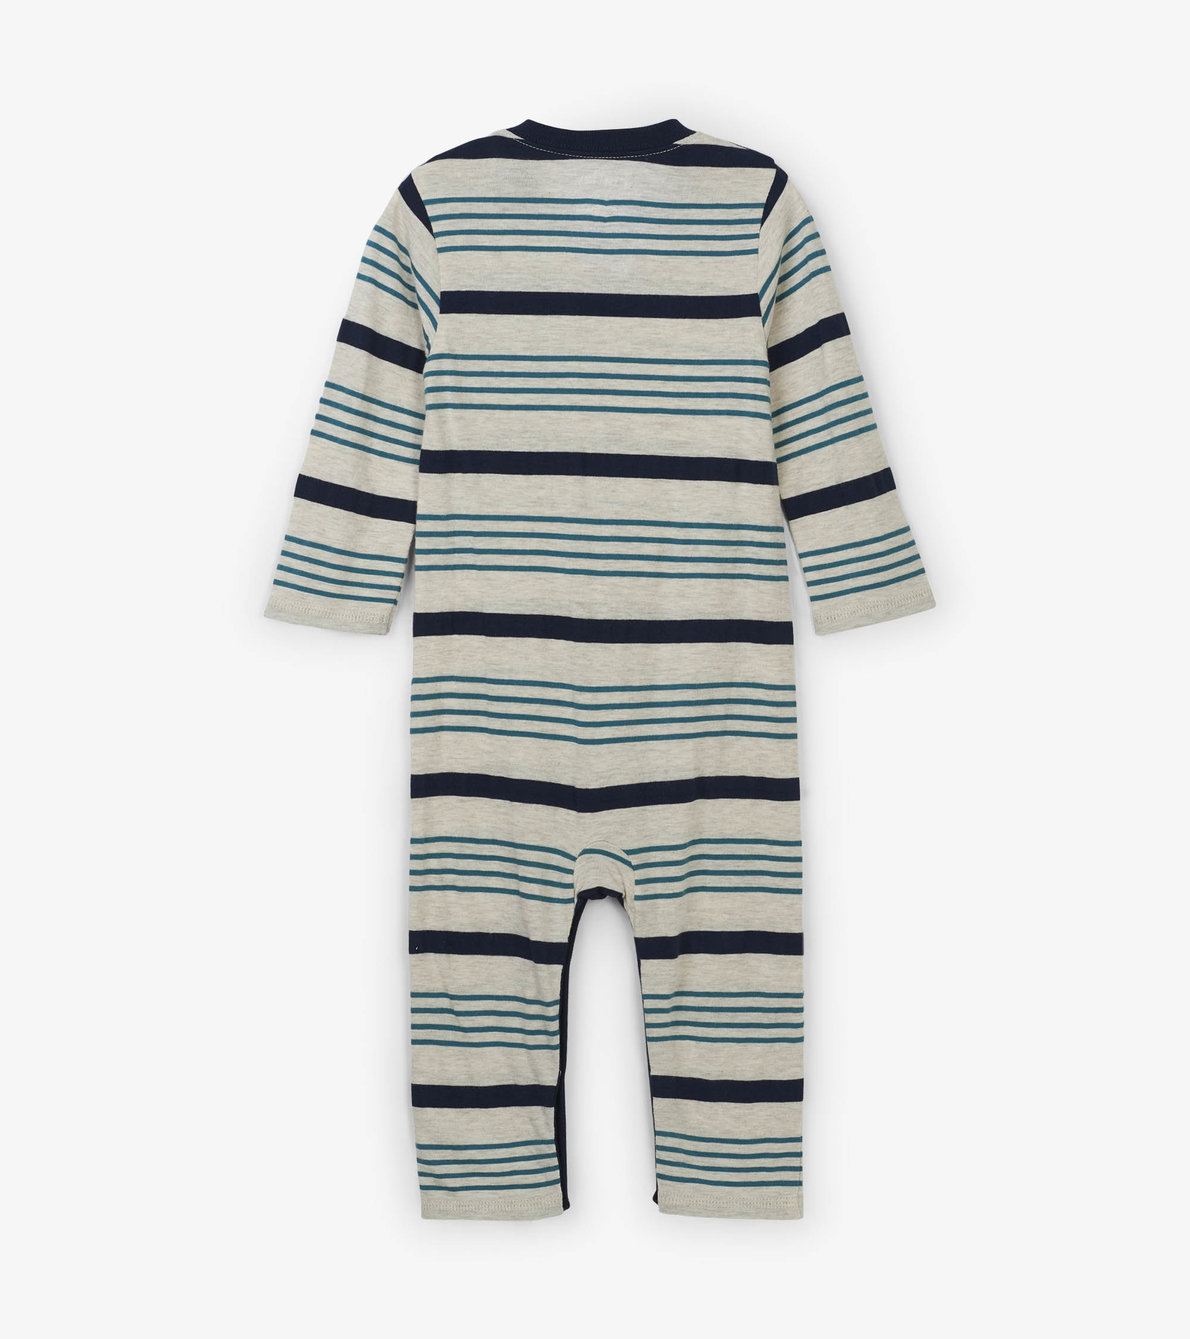 View larger image of Grey Stripe Baby Romper